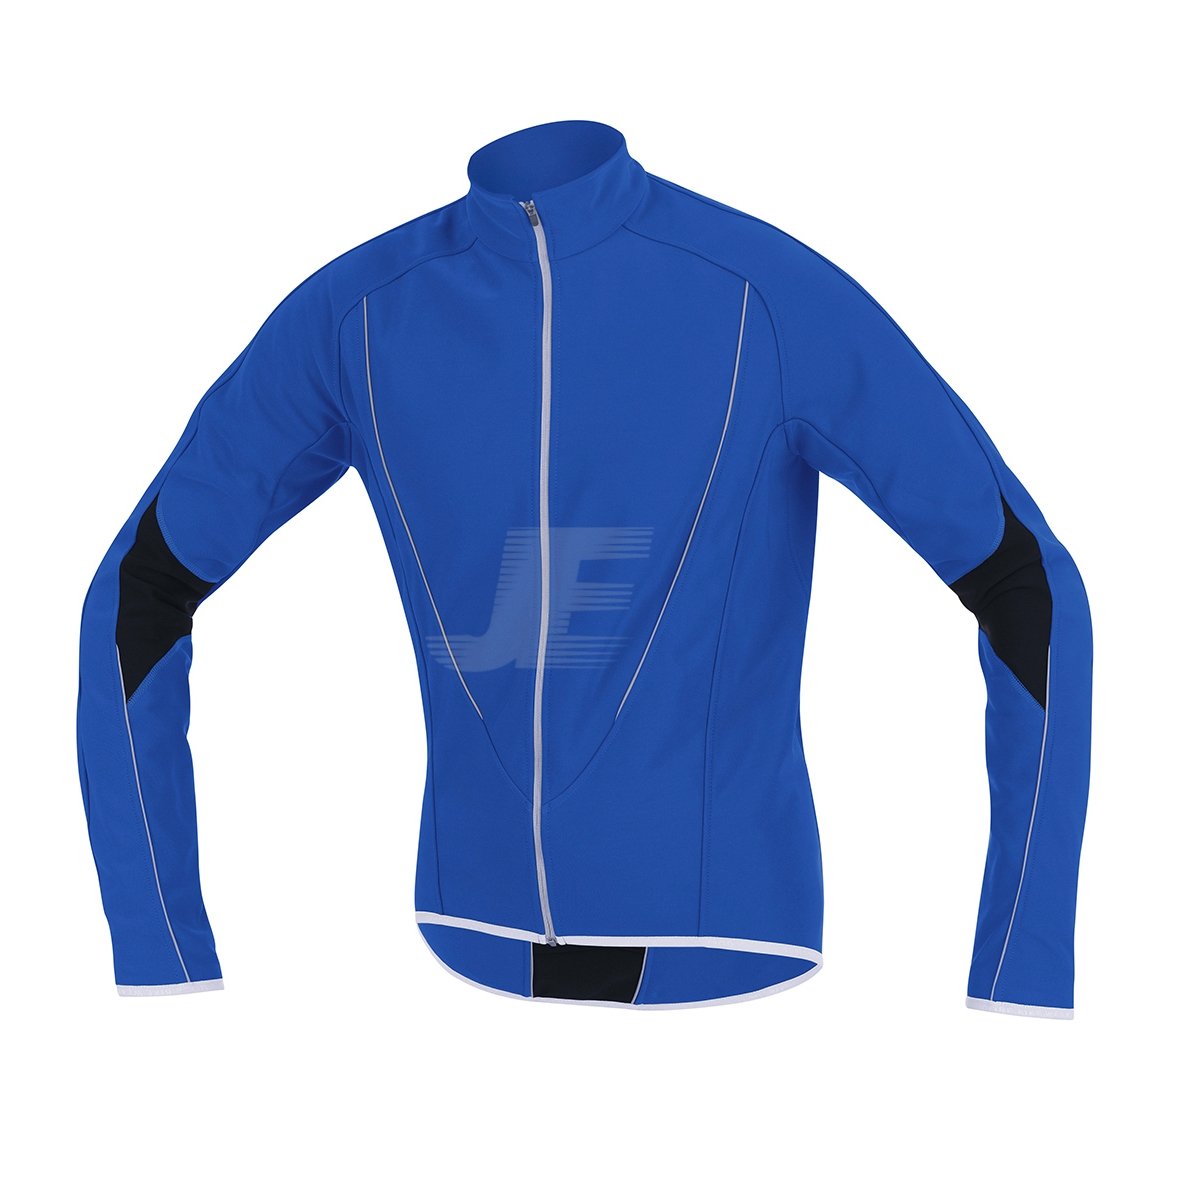 Contrast Zip Winter Softshell Cycle Riding Jacket With Pipping